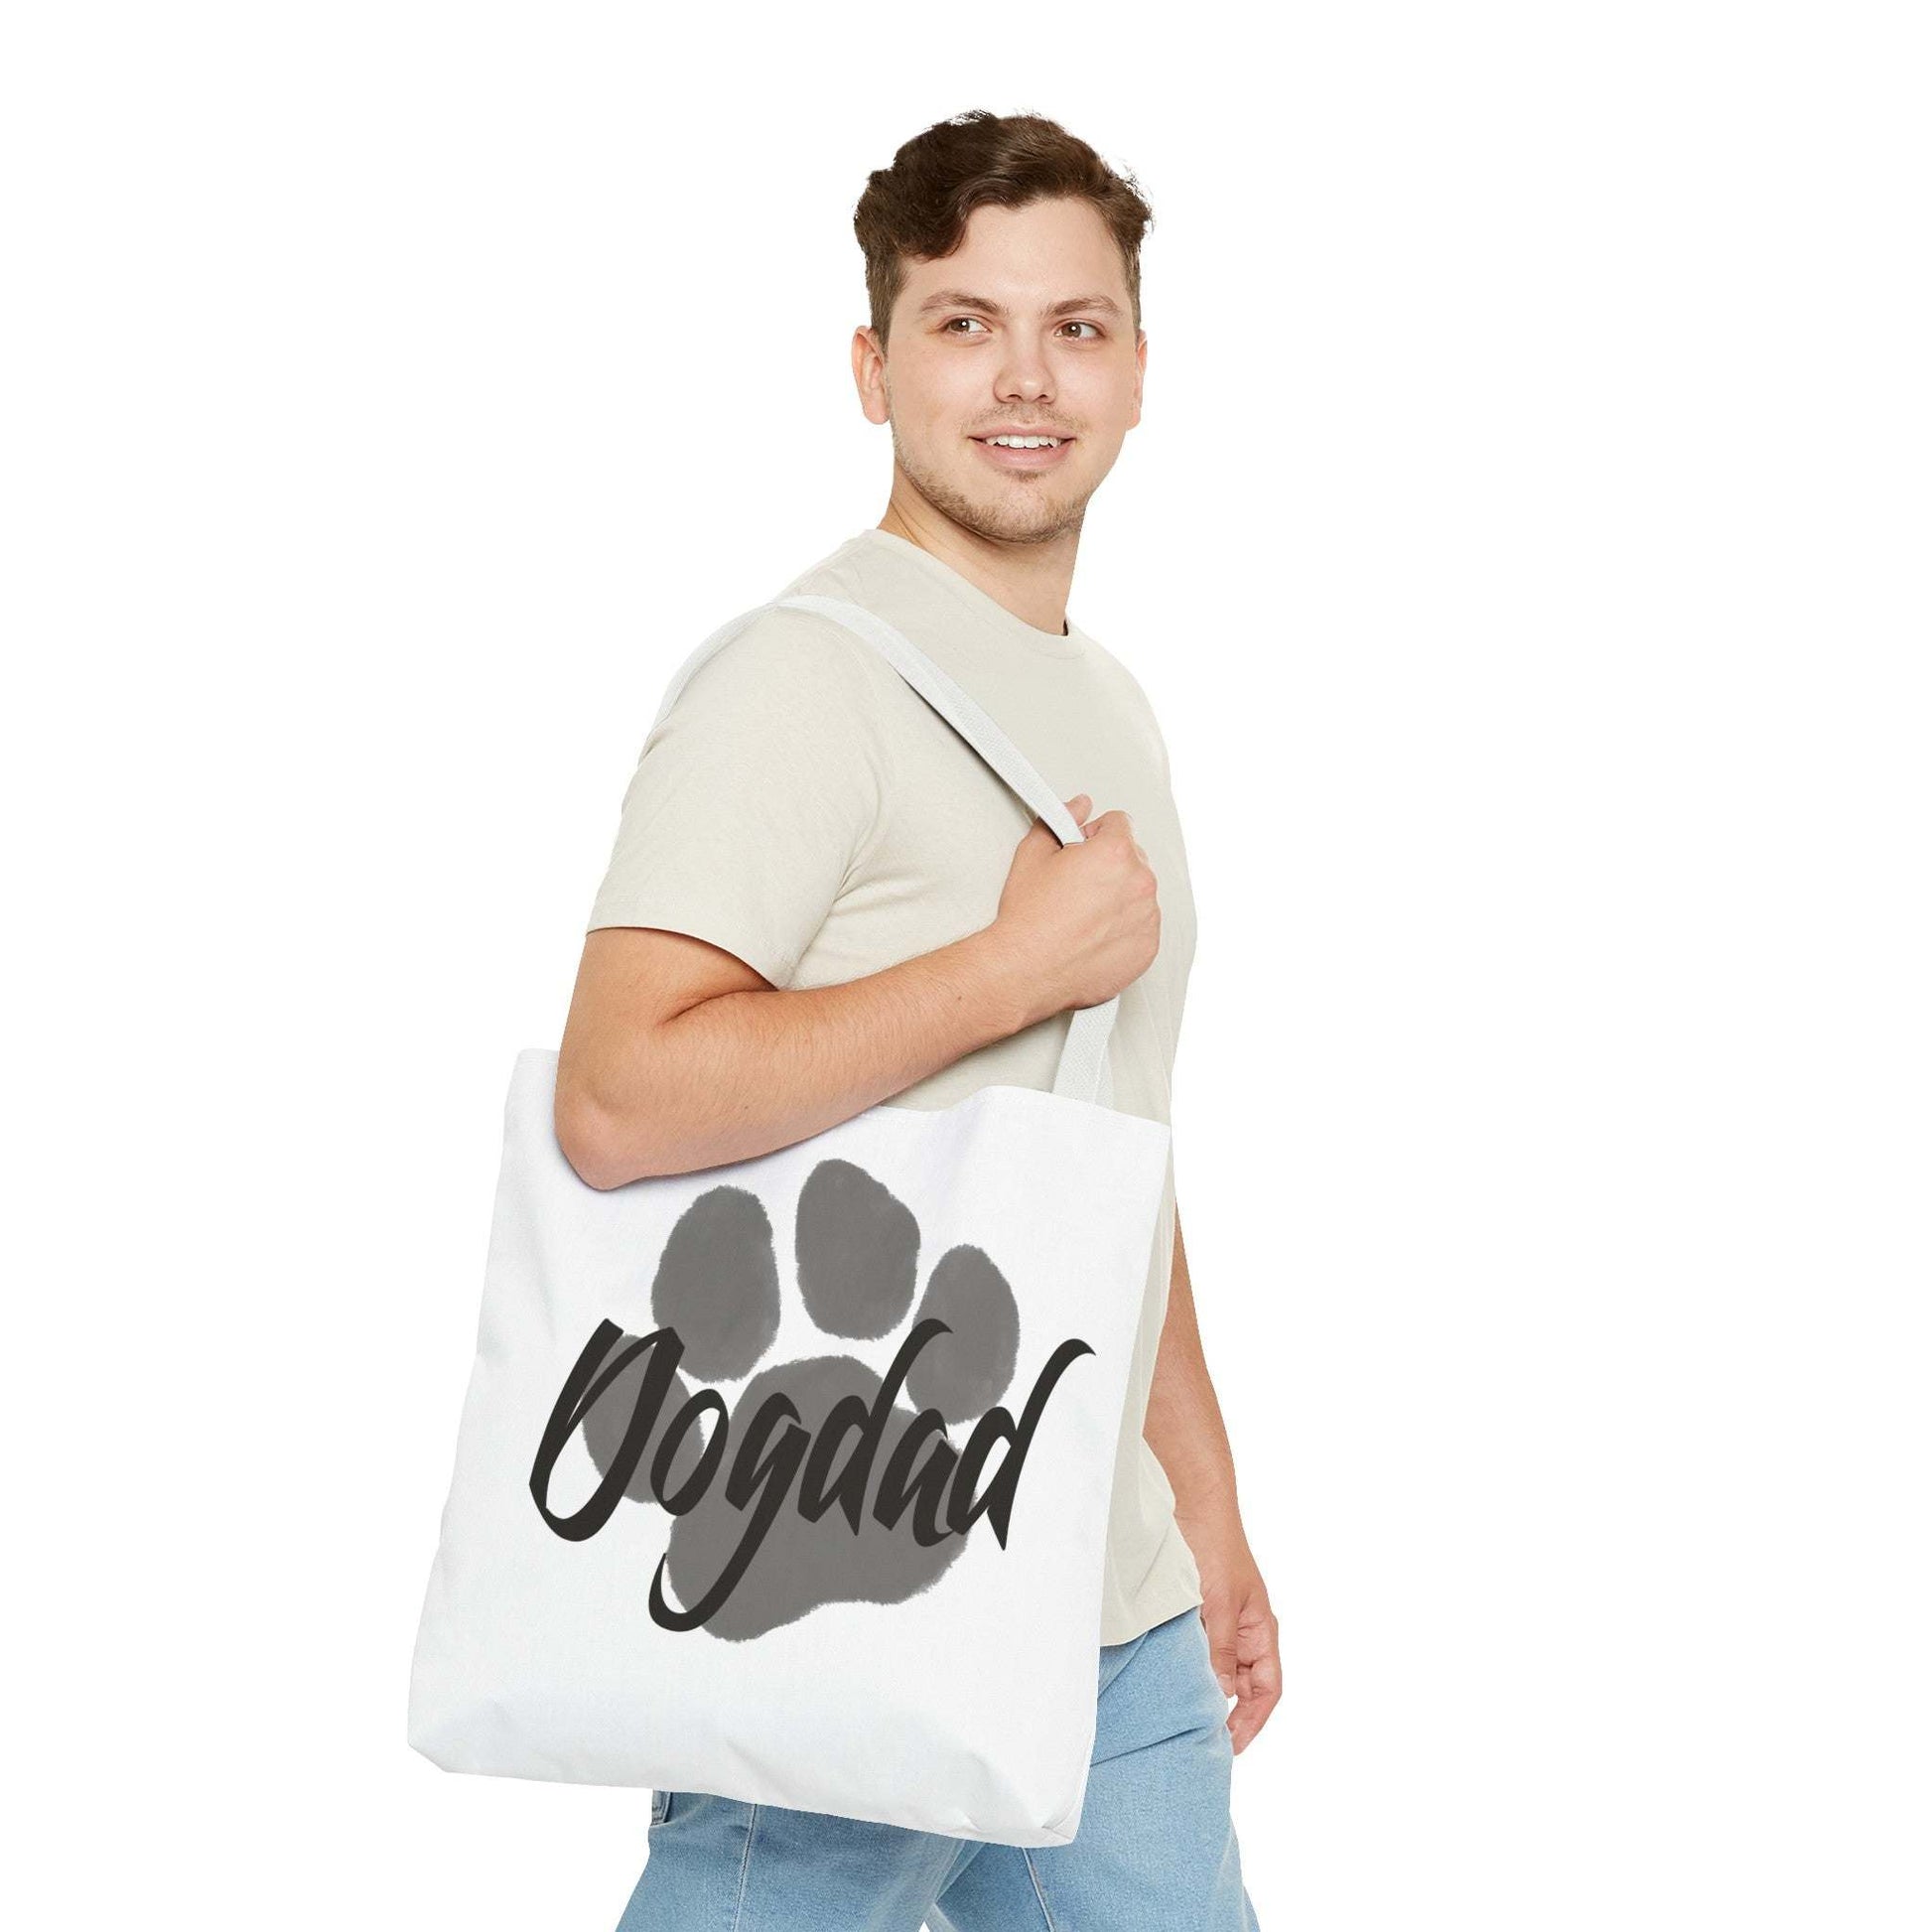 high-quality tote bags